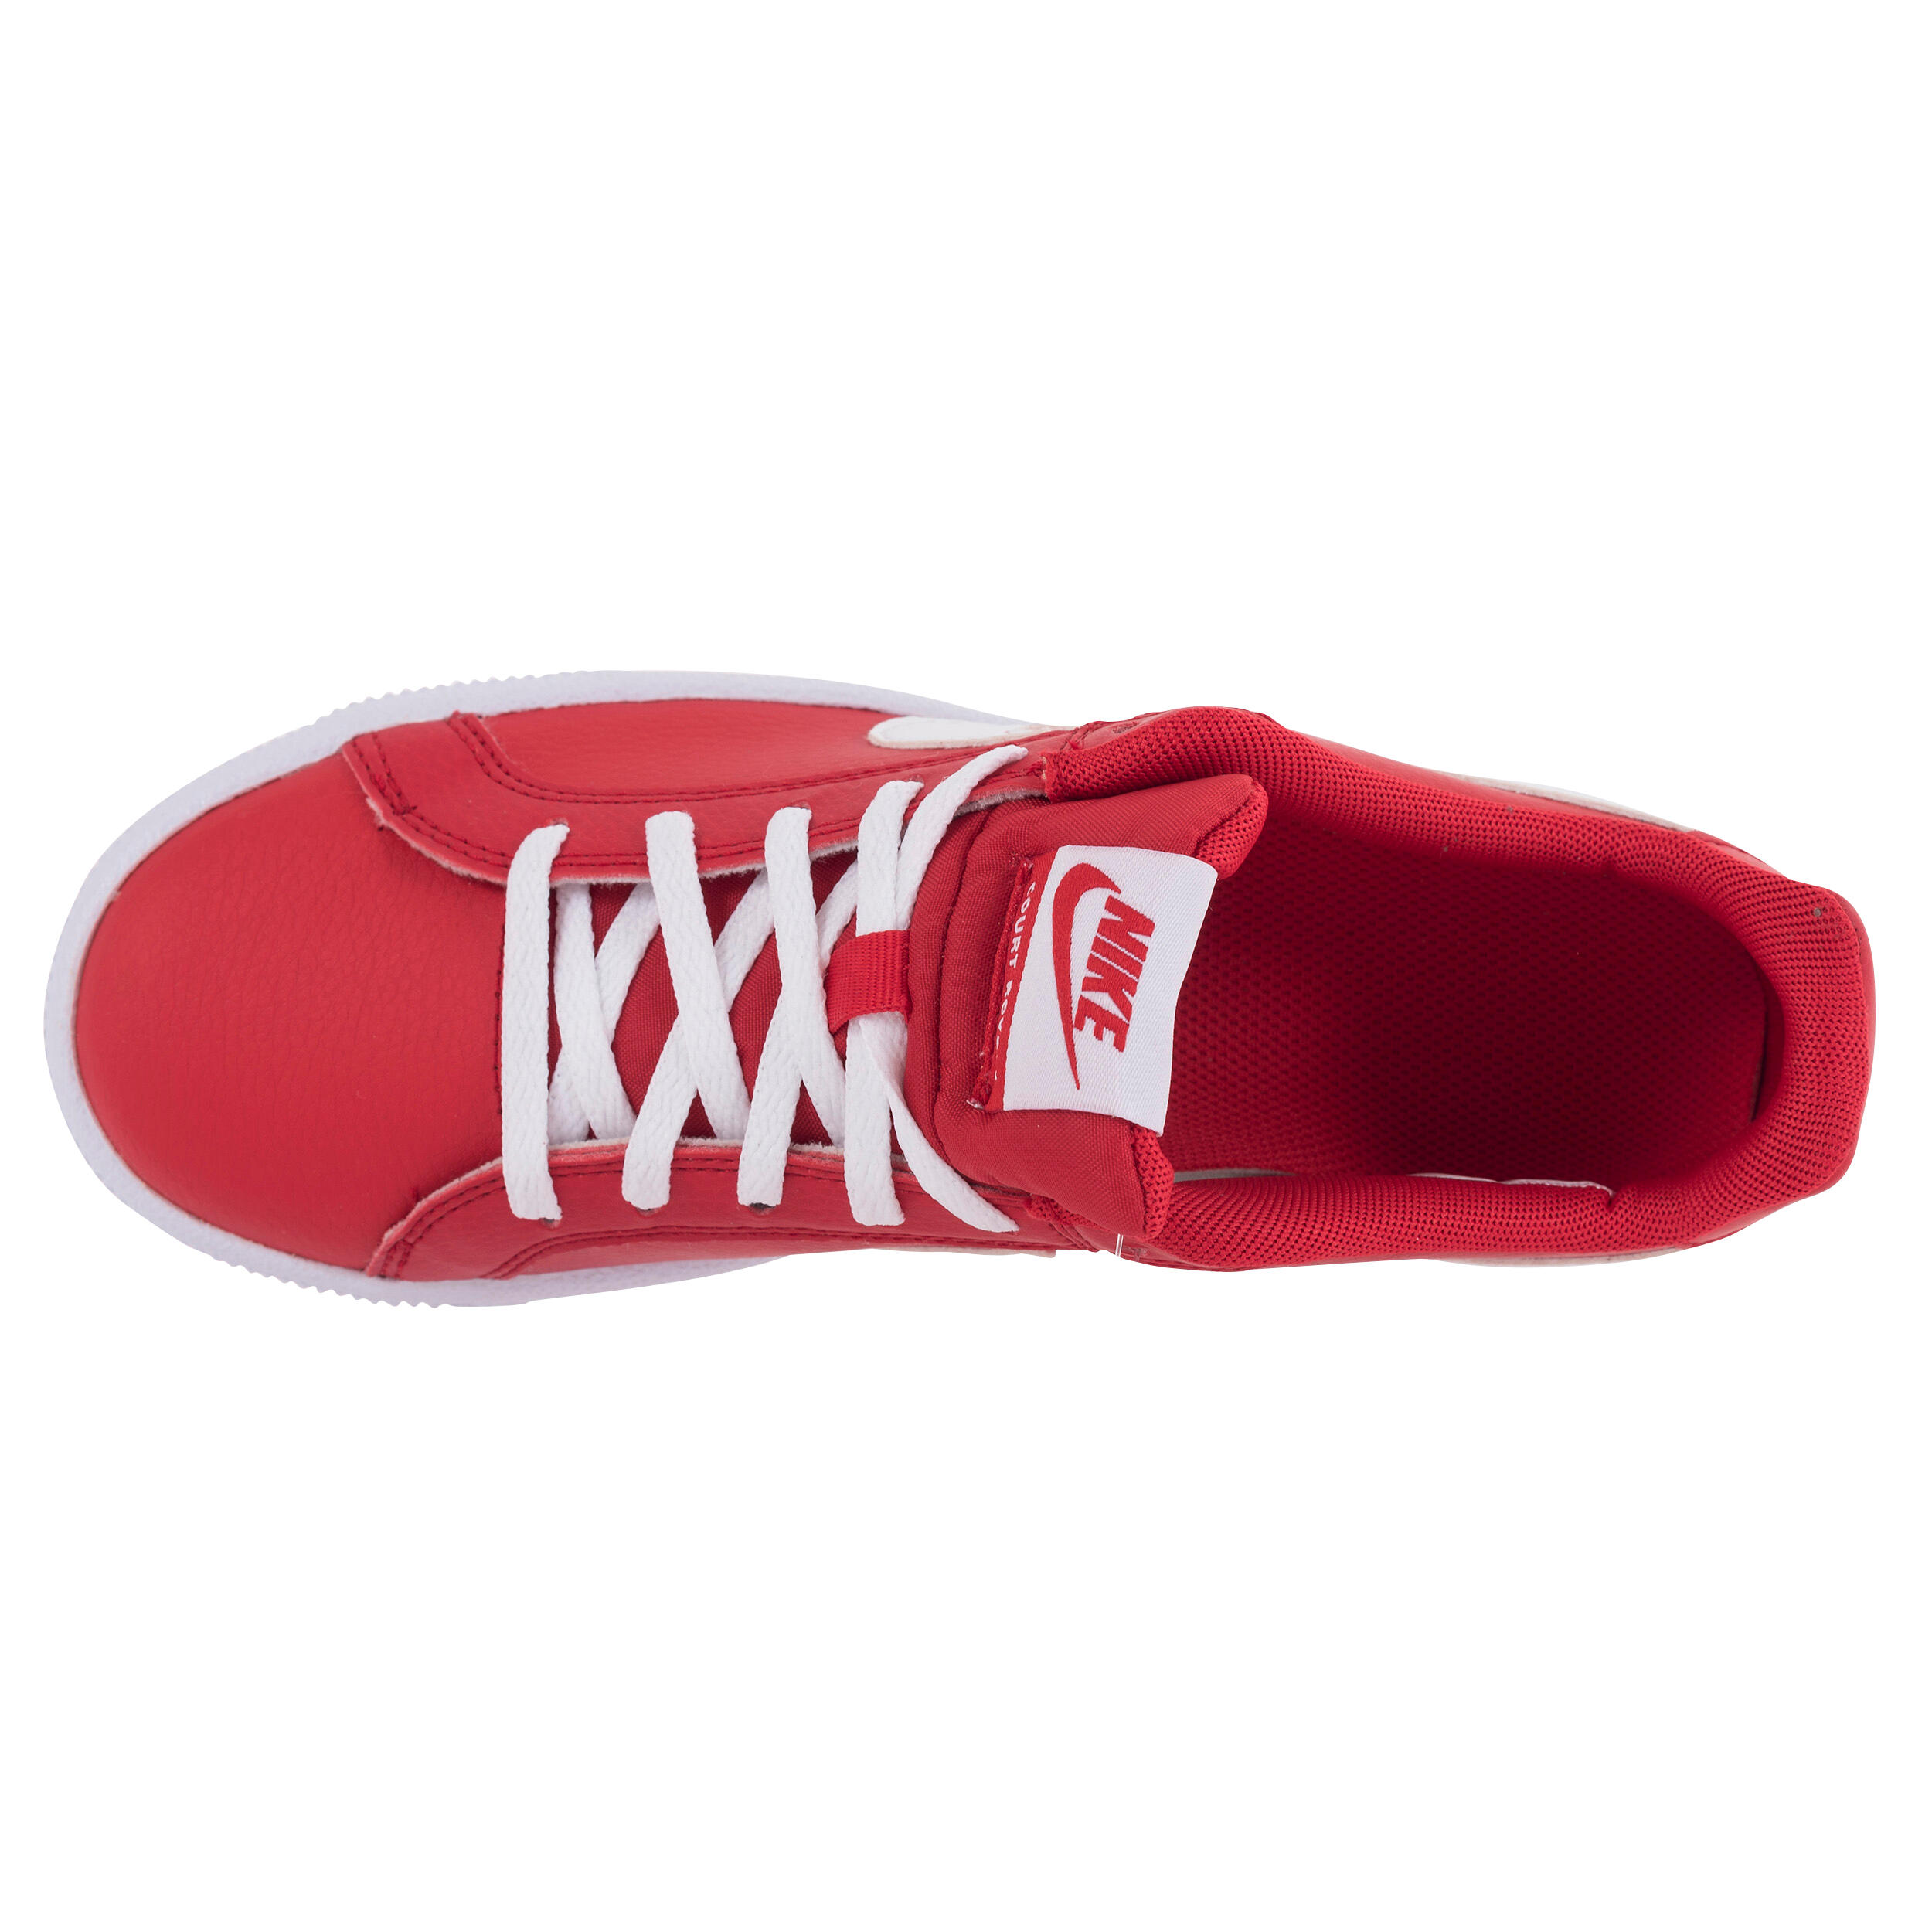 Court Royale Junior Tennis Shoes - Red 6/9